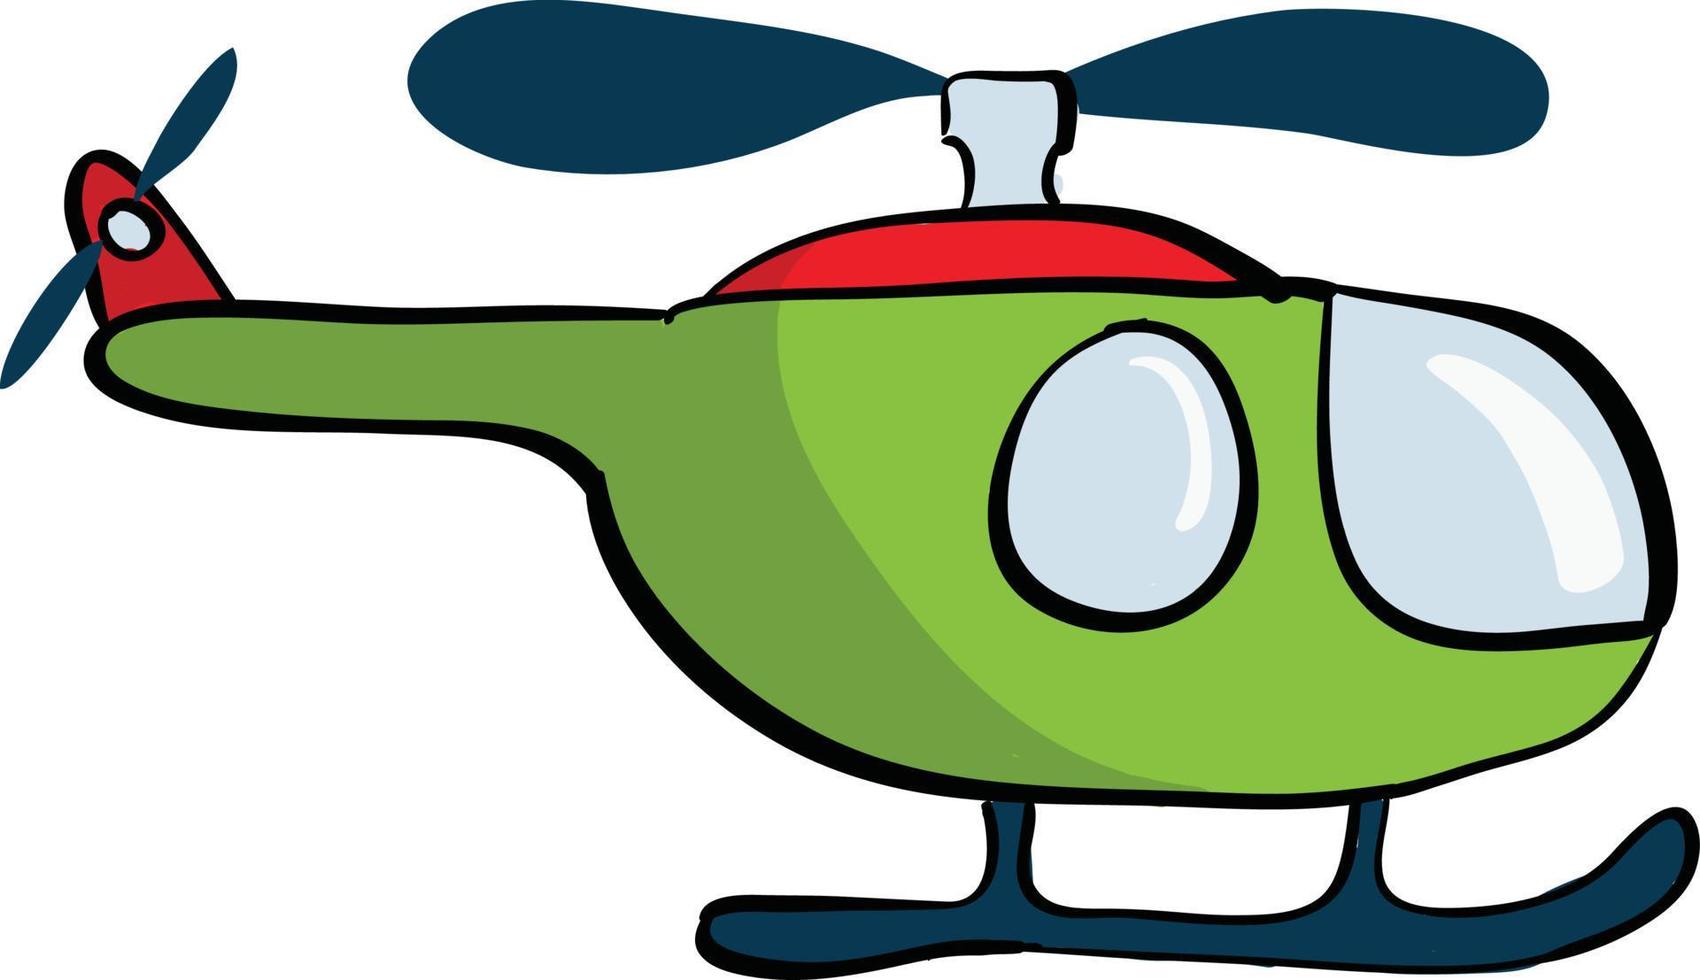 Green helicopter, illustration, vector on white background.